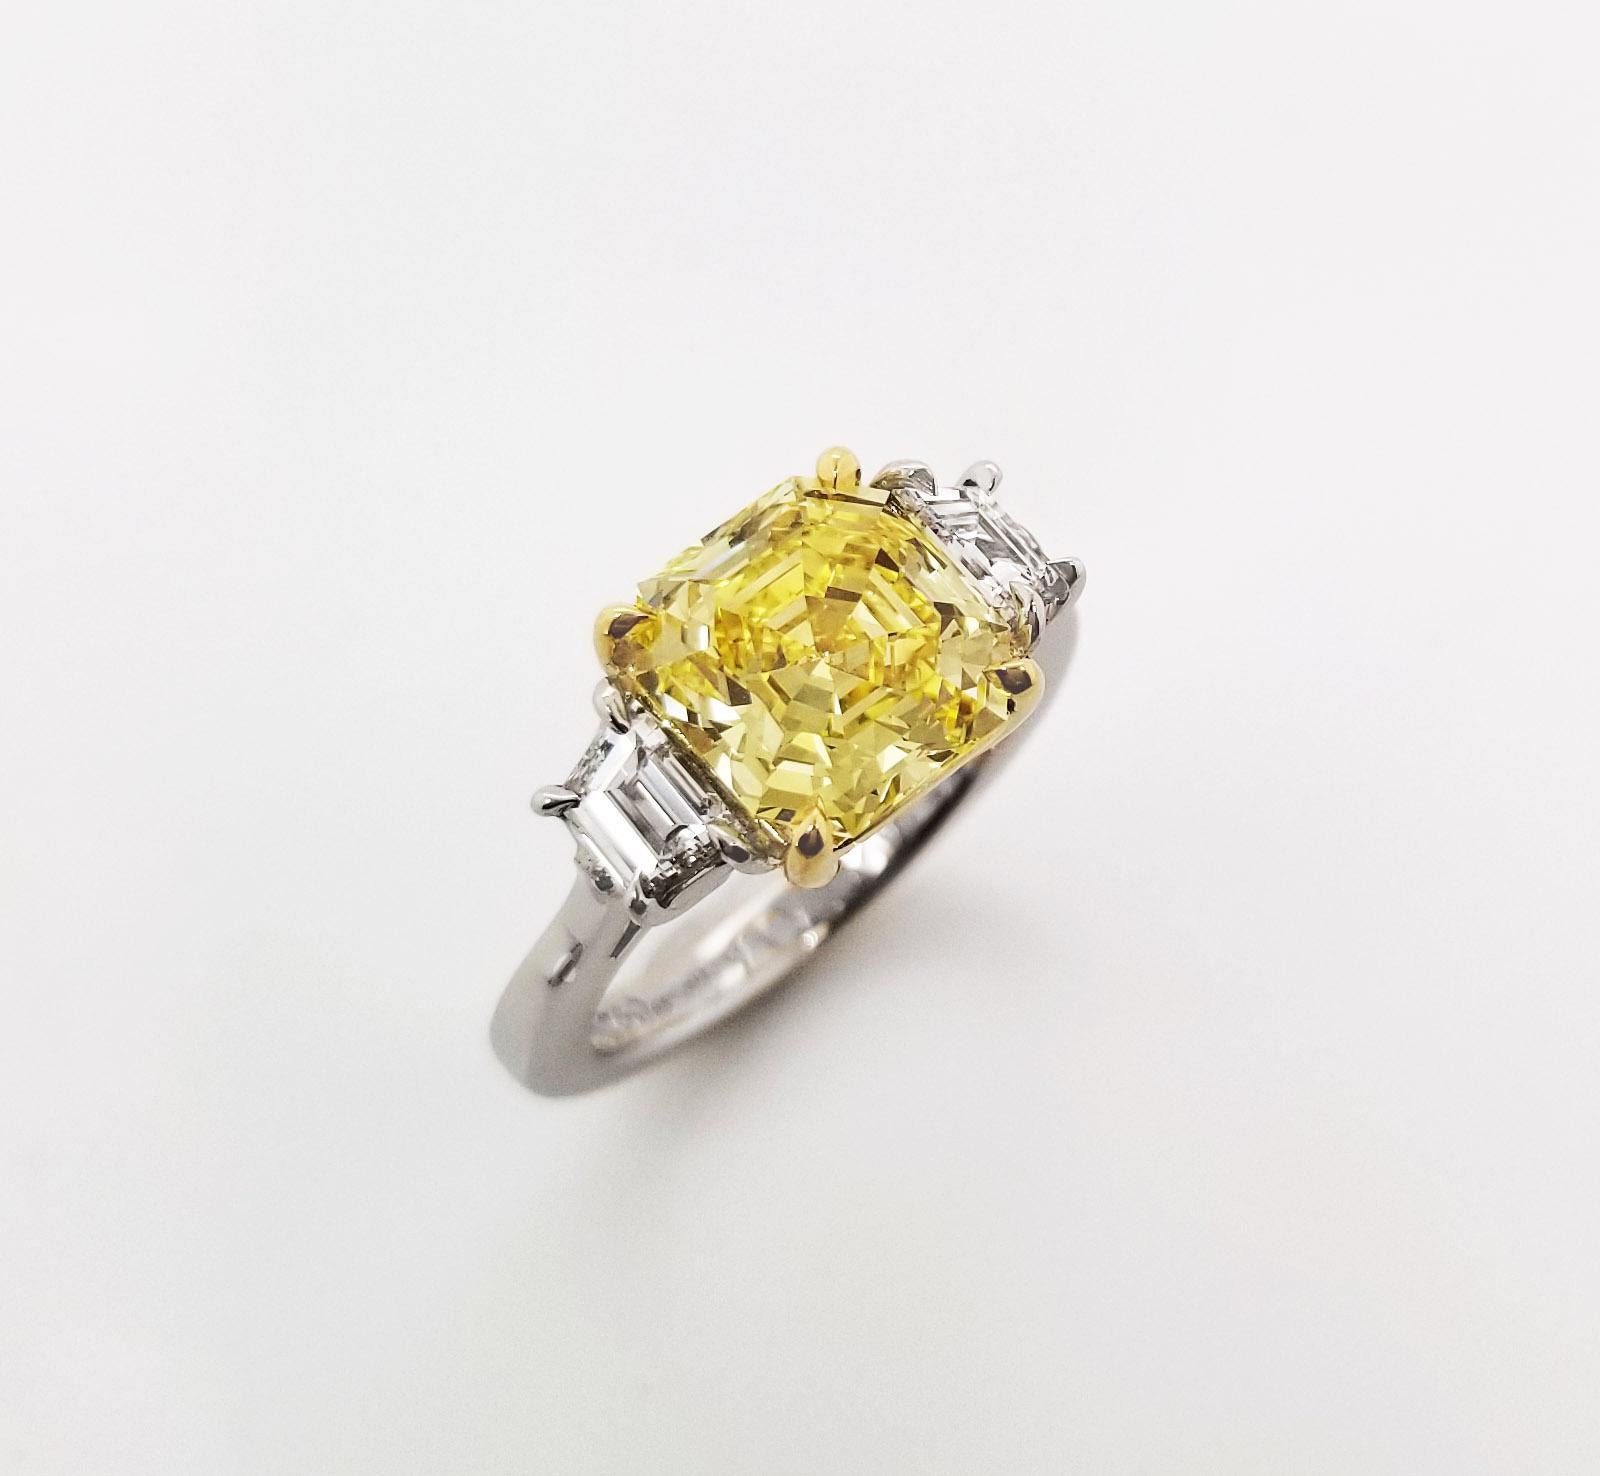 From SCARSELLI, this beautiful statement ring features a 3 carat Fancy Vivid Yellow Emerald Cut Diamond flanked by a couple of E color VS clarity trapezoid cut white diamonds totaling 0.72 carats (see GIA certificate picture for more detailed center